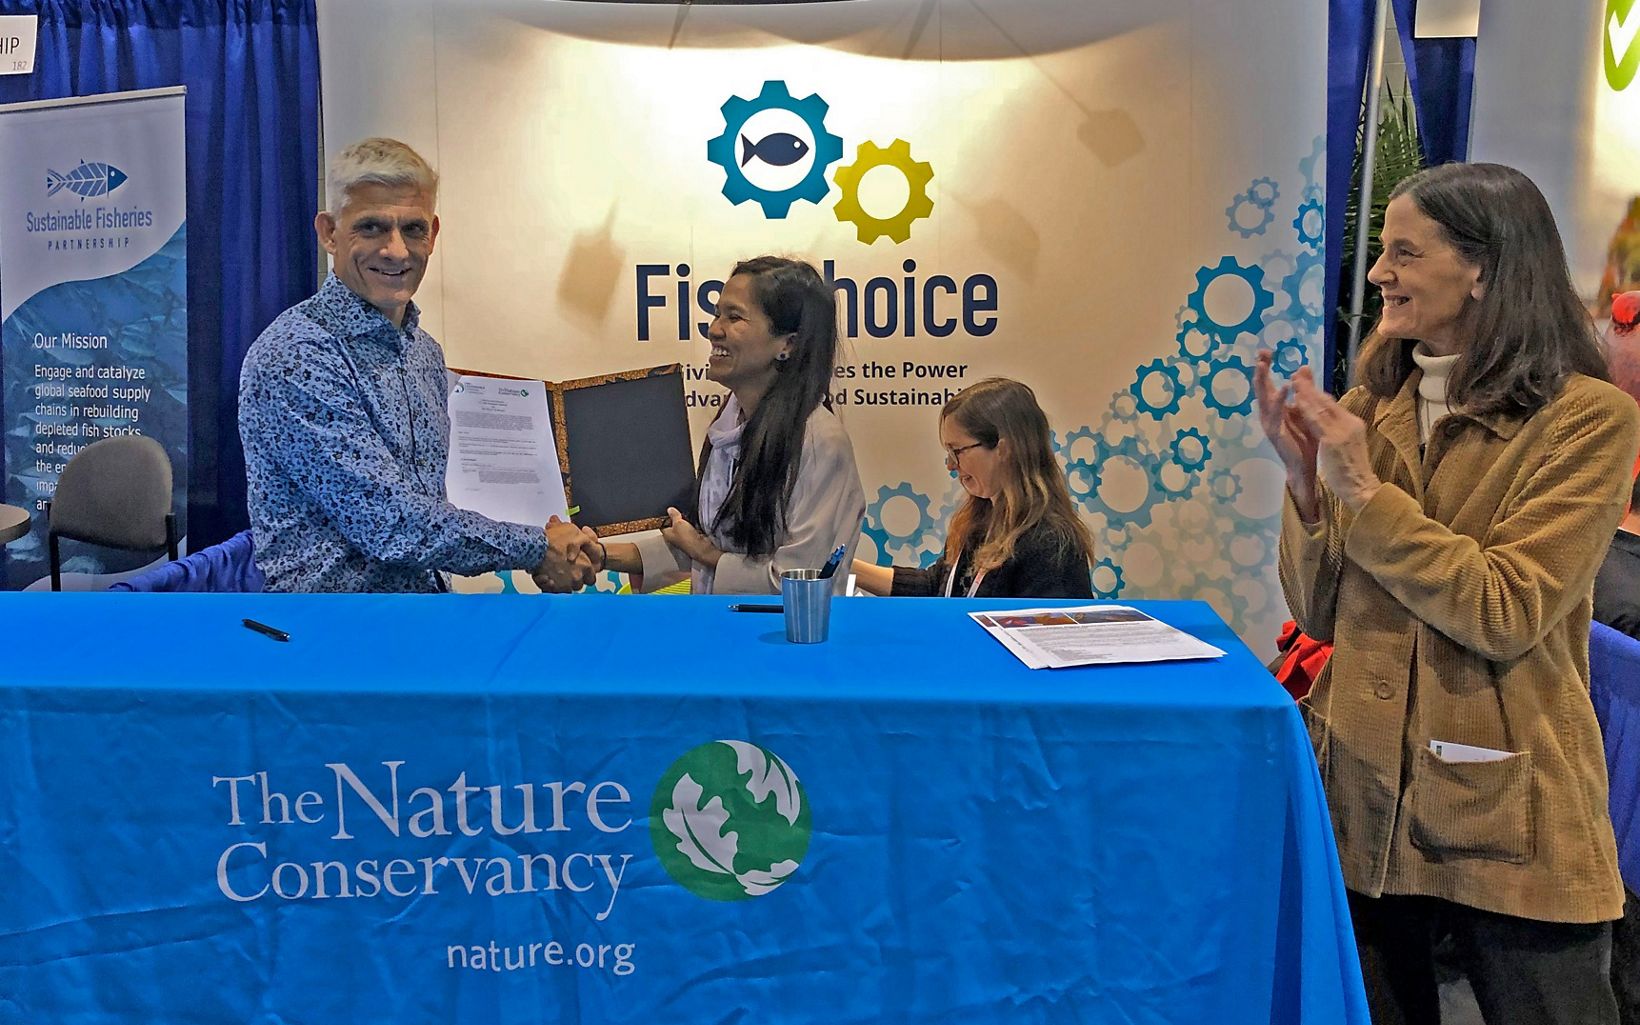 Signing for Snapper (From left) Peter Mous, Director of TNC Indonesia Fisheries Program with Hema Sitoriu of Bali Sustainable Seafood and Lynn Scarlett, VP, Policy and Government Affairs for TNC. © TNC